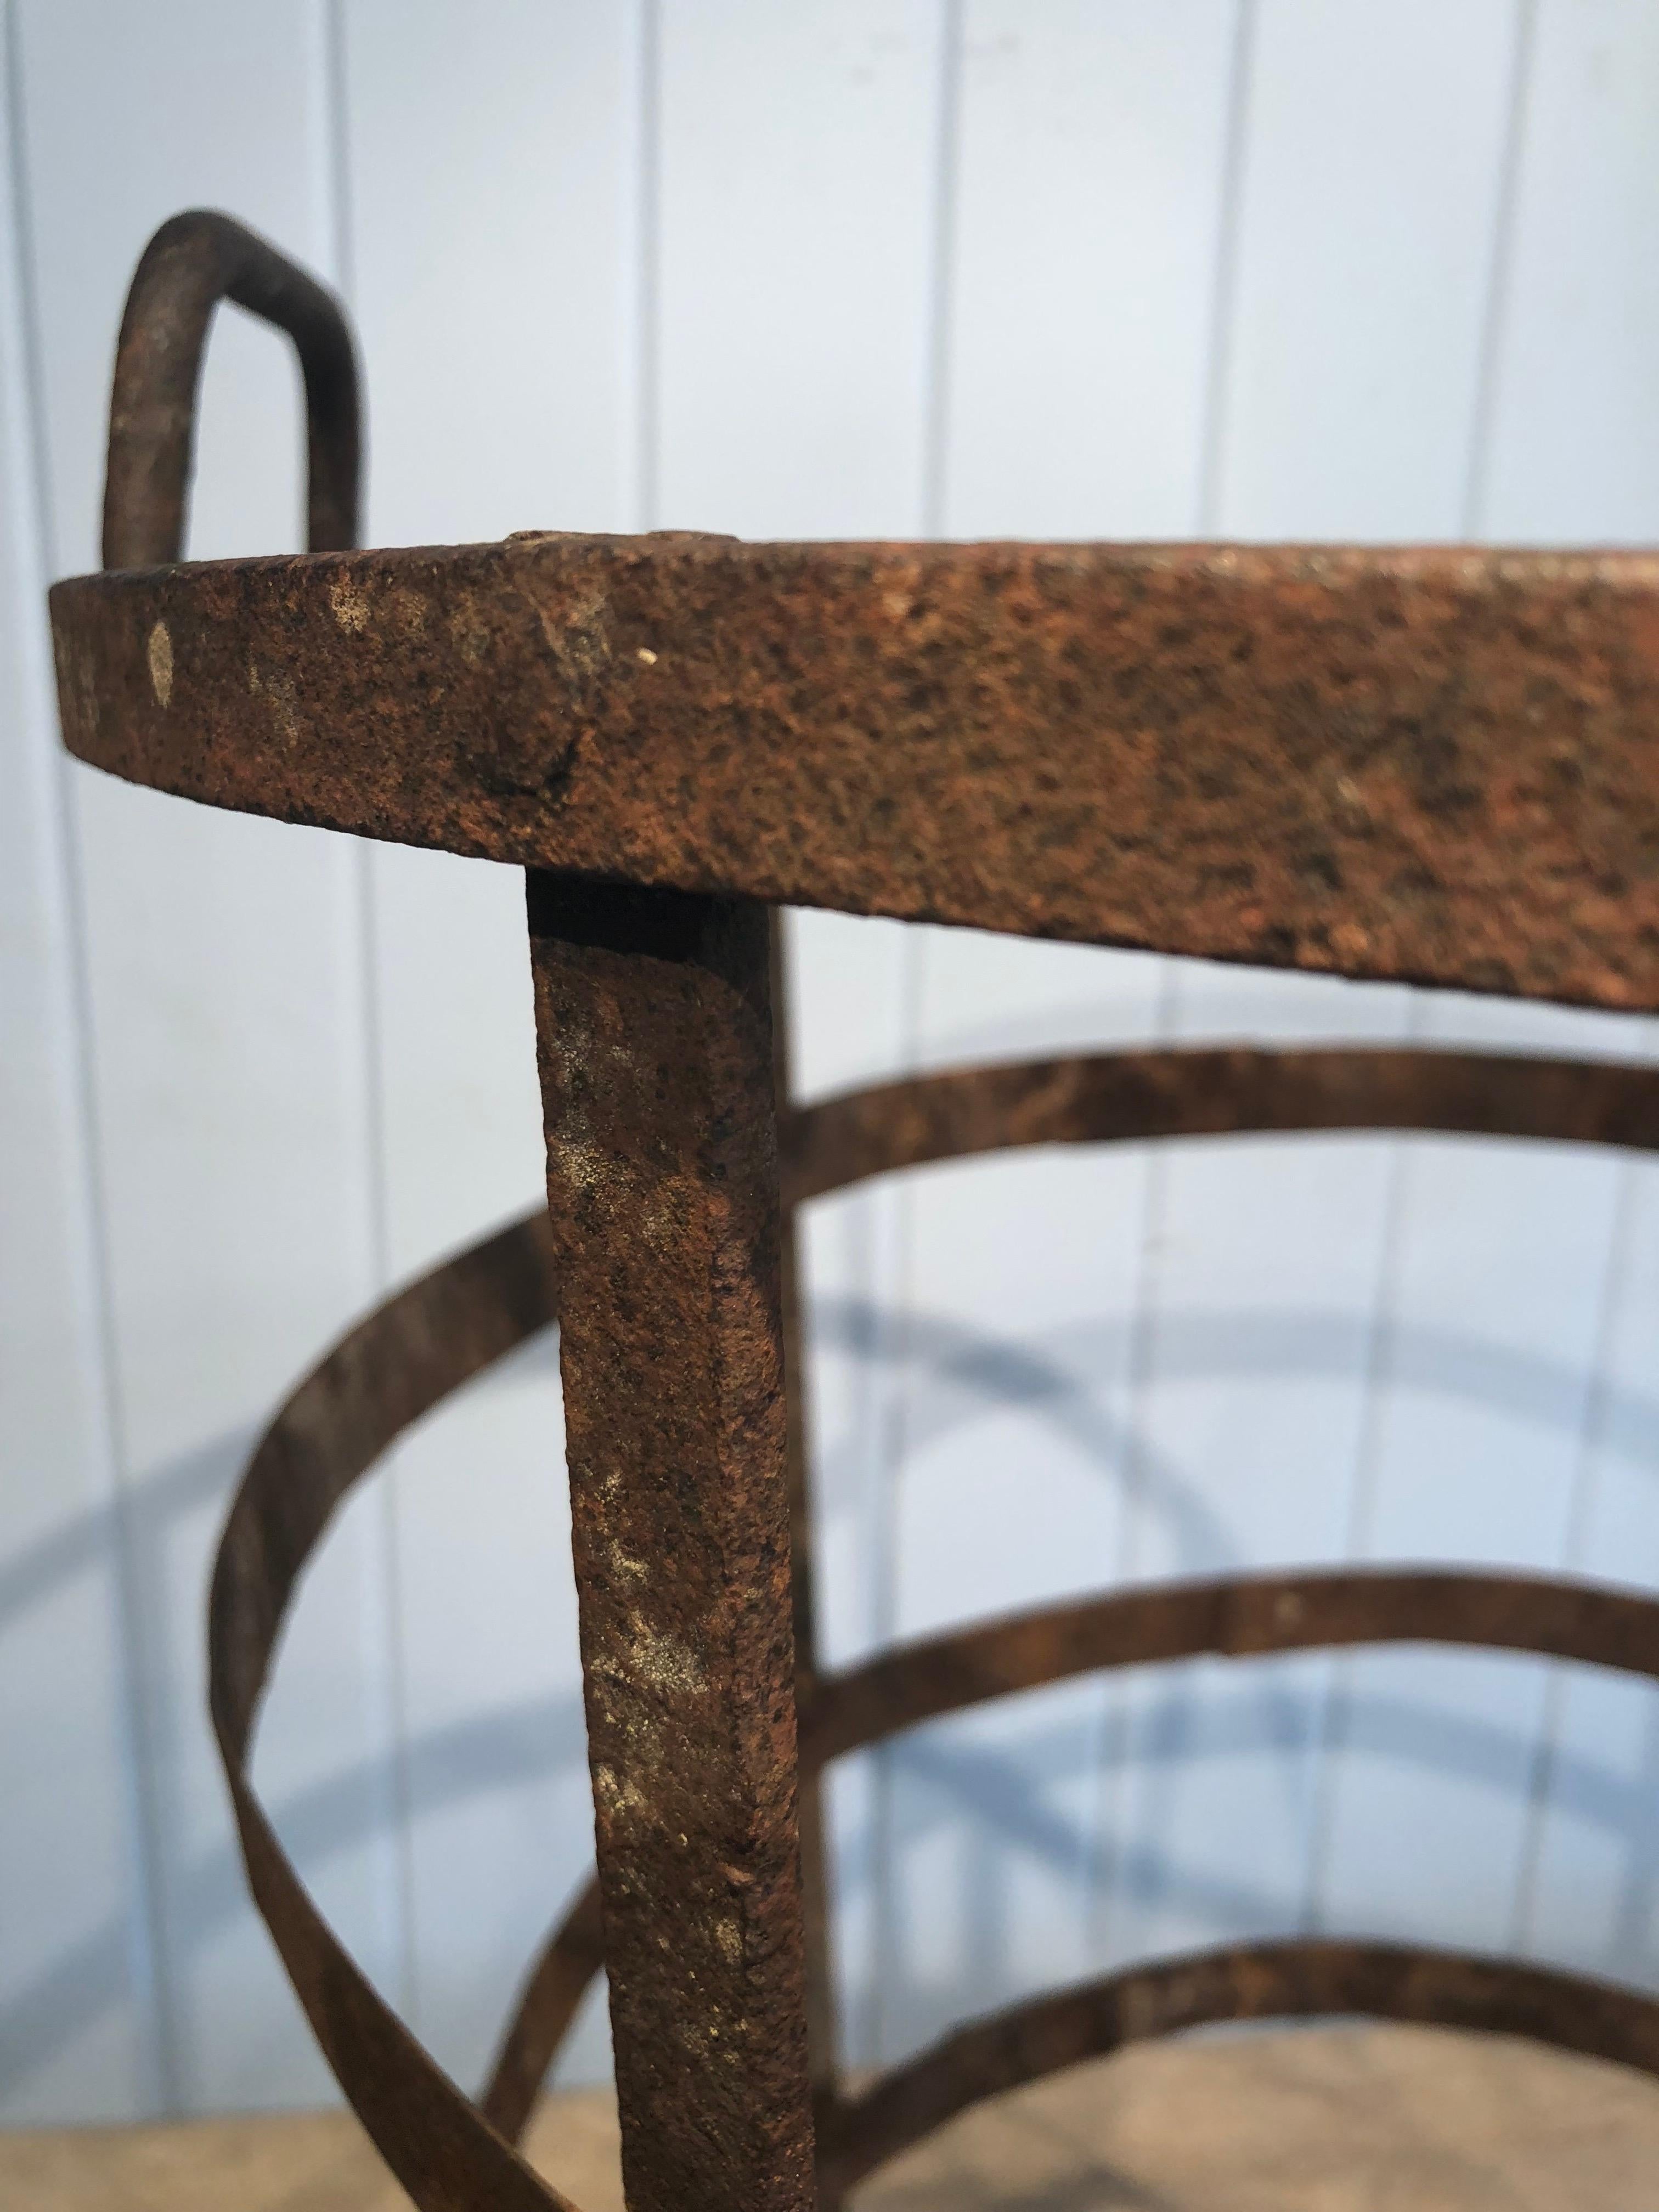 Hand-Crafted 19th Century French Wrought Iron Laundry Basket with Handles For Sale